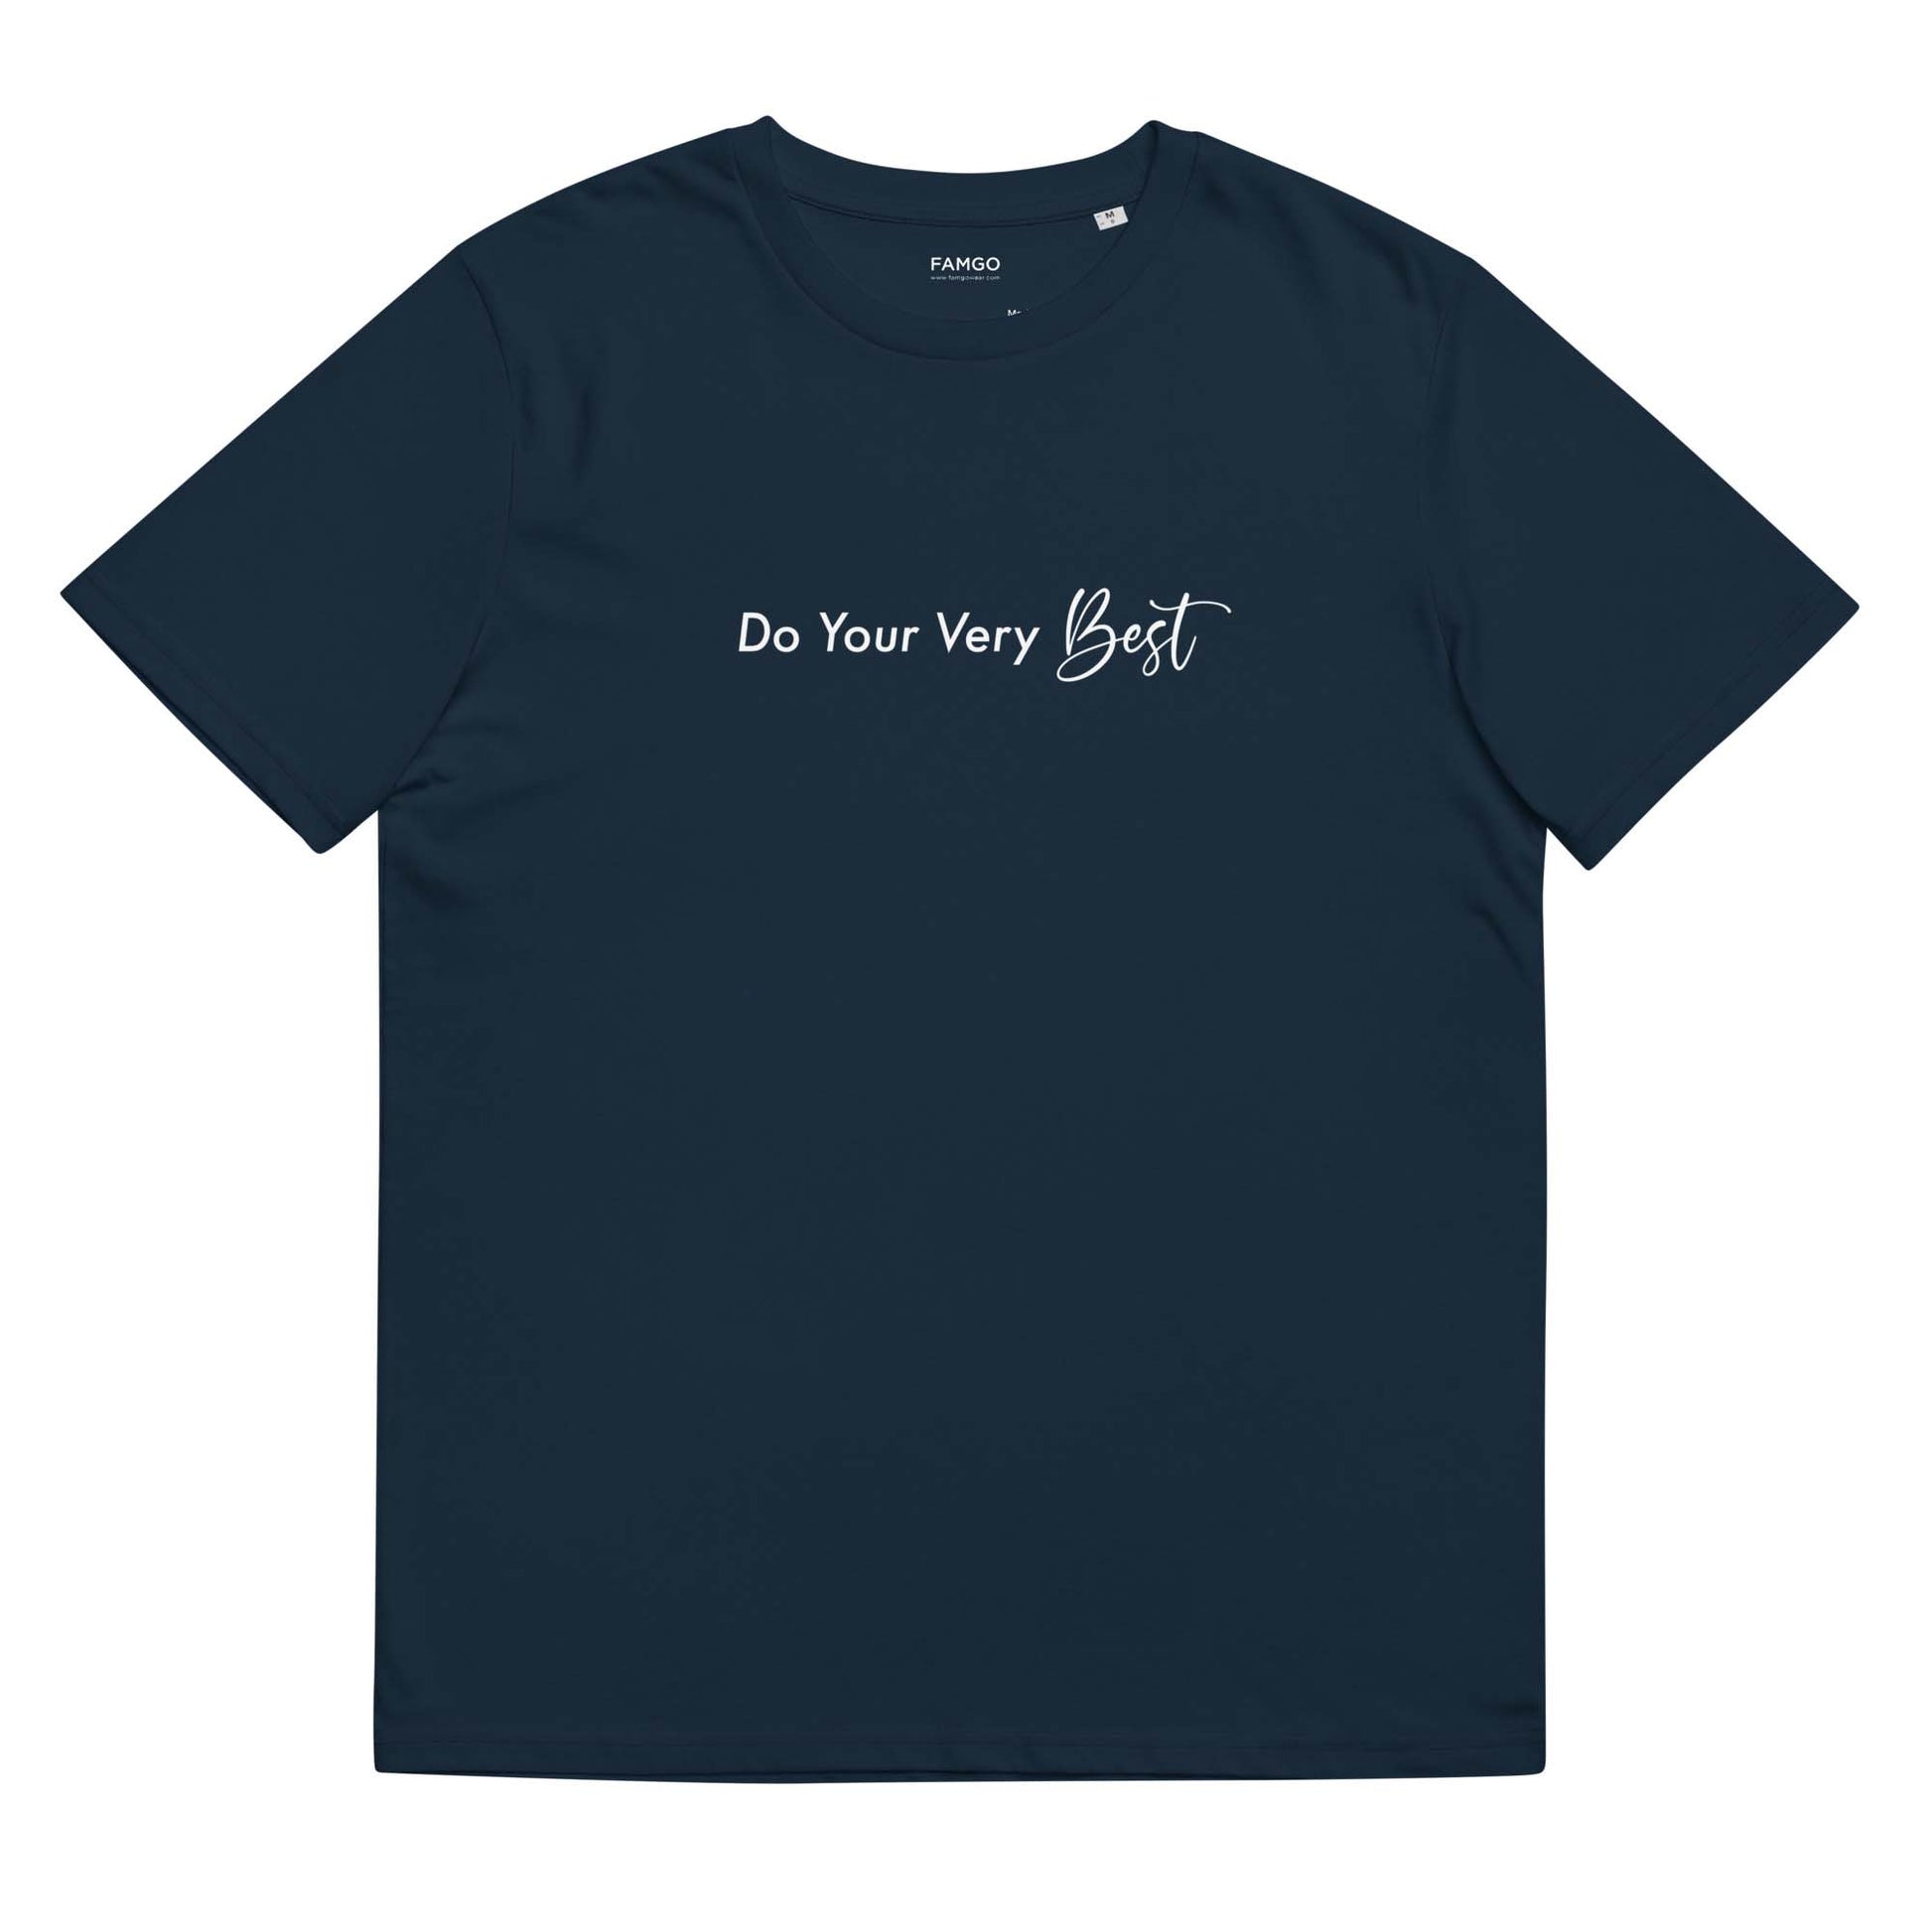 Men navy inspirational t-shirt with motivational quote, "Do Your Very Best."